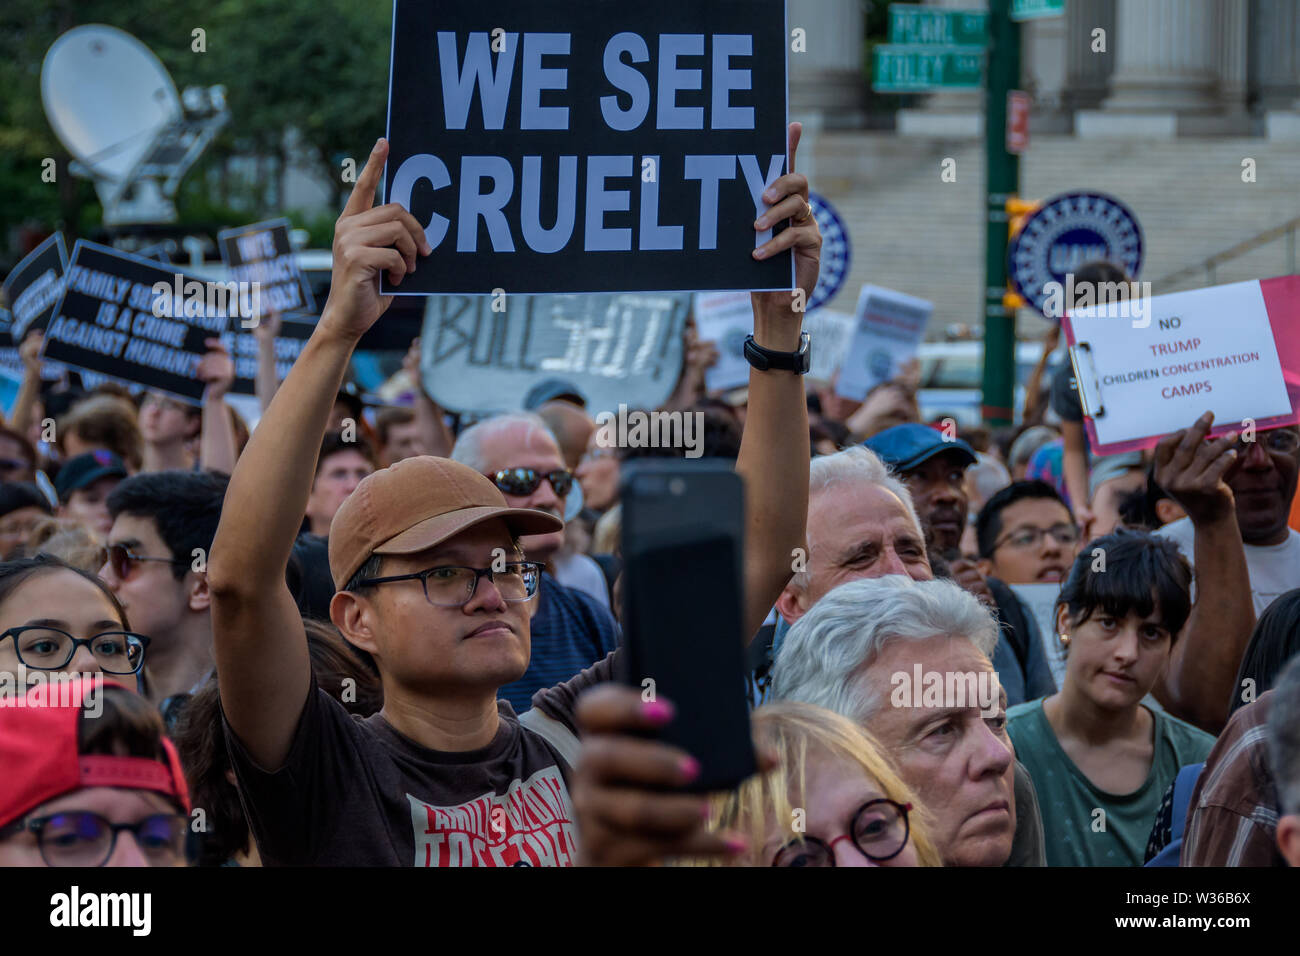 New York, USA. 12th July, 2019. Thousands of advocates, activists and community members flooded the streets at Foley Square, across from the Immigration and Customs Enforcement (ICE) New York Field Office on July 12, 2019 to join New Sanctuary Coalition and The New York Immigration Coalition at the Lights for Liberty vigil, deemed one of the largest solidarity actions in history with over 750 vigils across 5 continents. A light was lit for all those held in U.S. detention camps and to bring light to the darkness of the Trump administration's horrific policies. Credit: PACIFIC PRESS/Alamy Live  Stock Photo